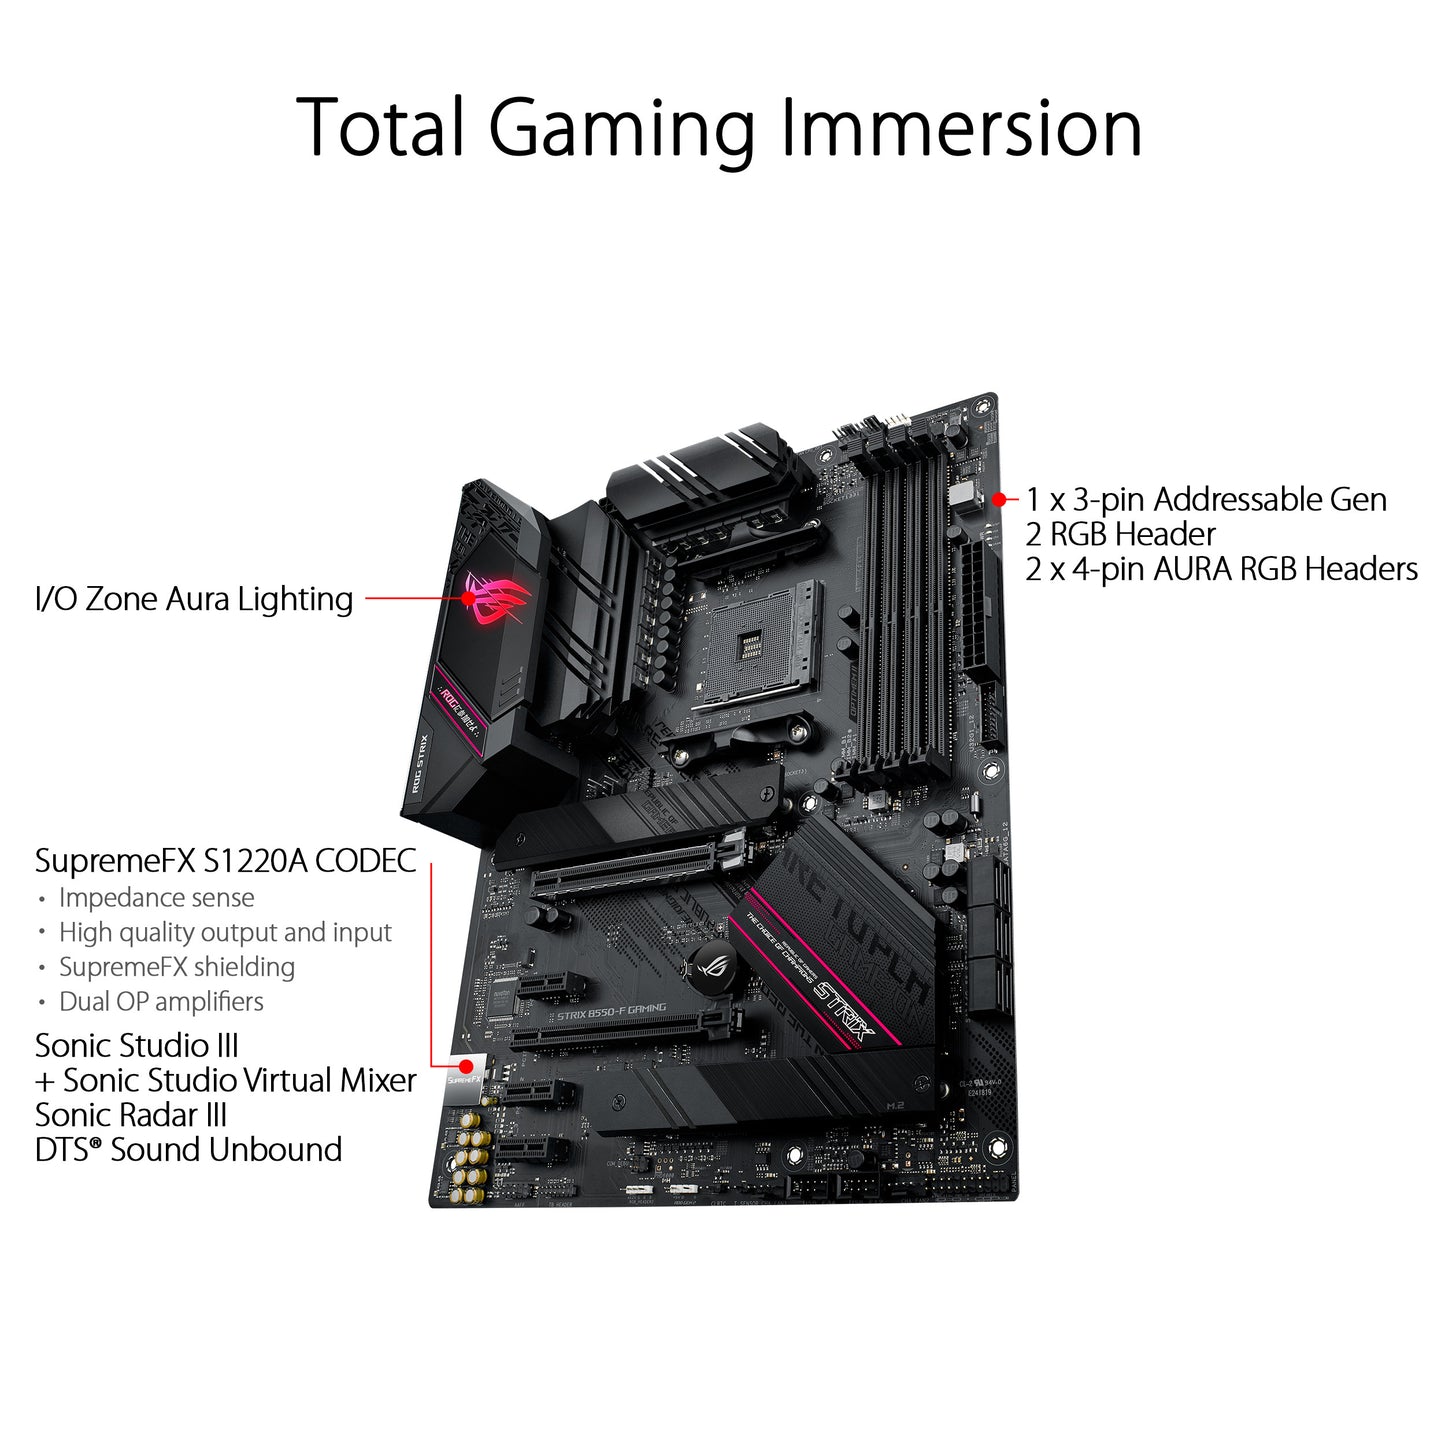 ASUS ROG STRIX B550-F AMD A4 ATX Gaming Motherboard with PCIe 4.0 and AI Networking